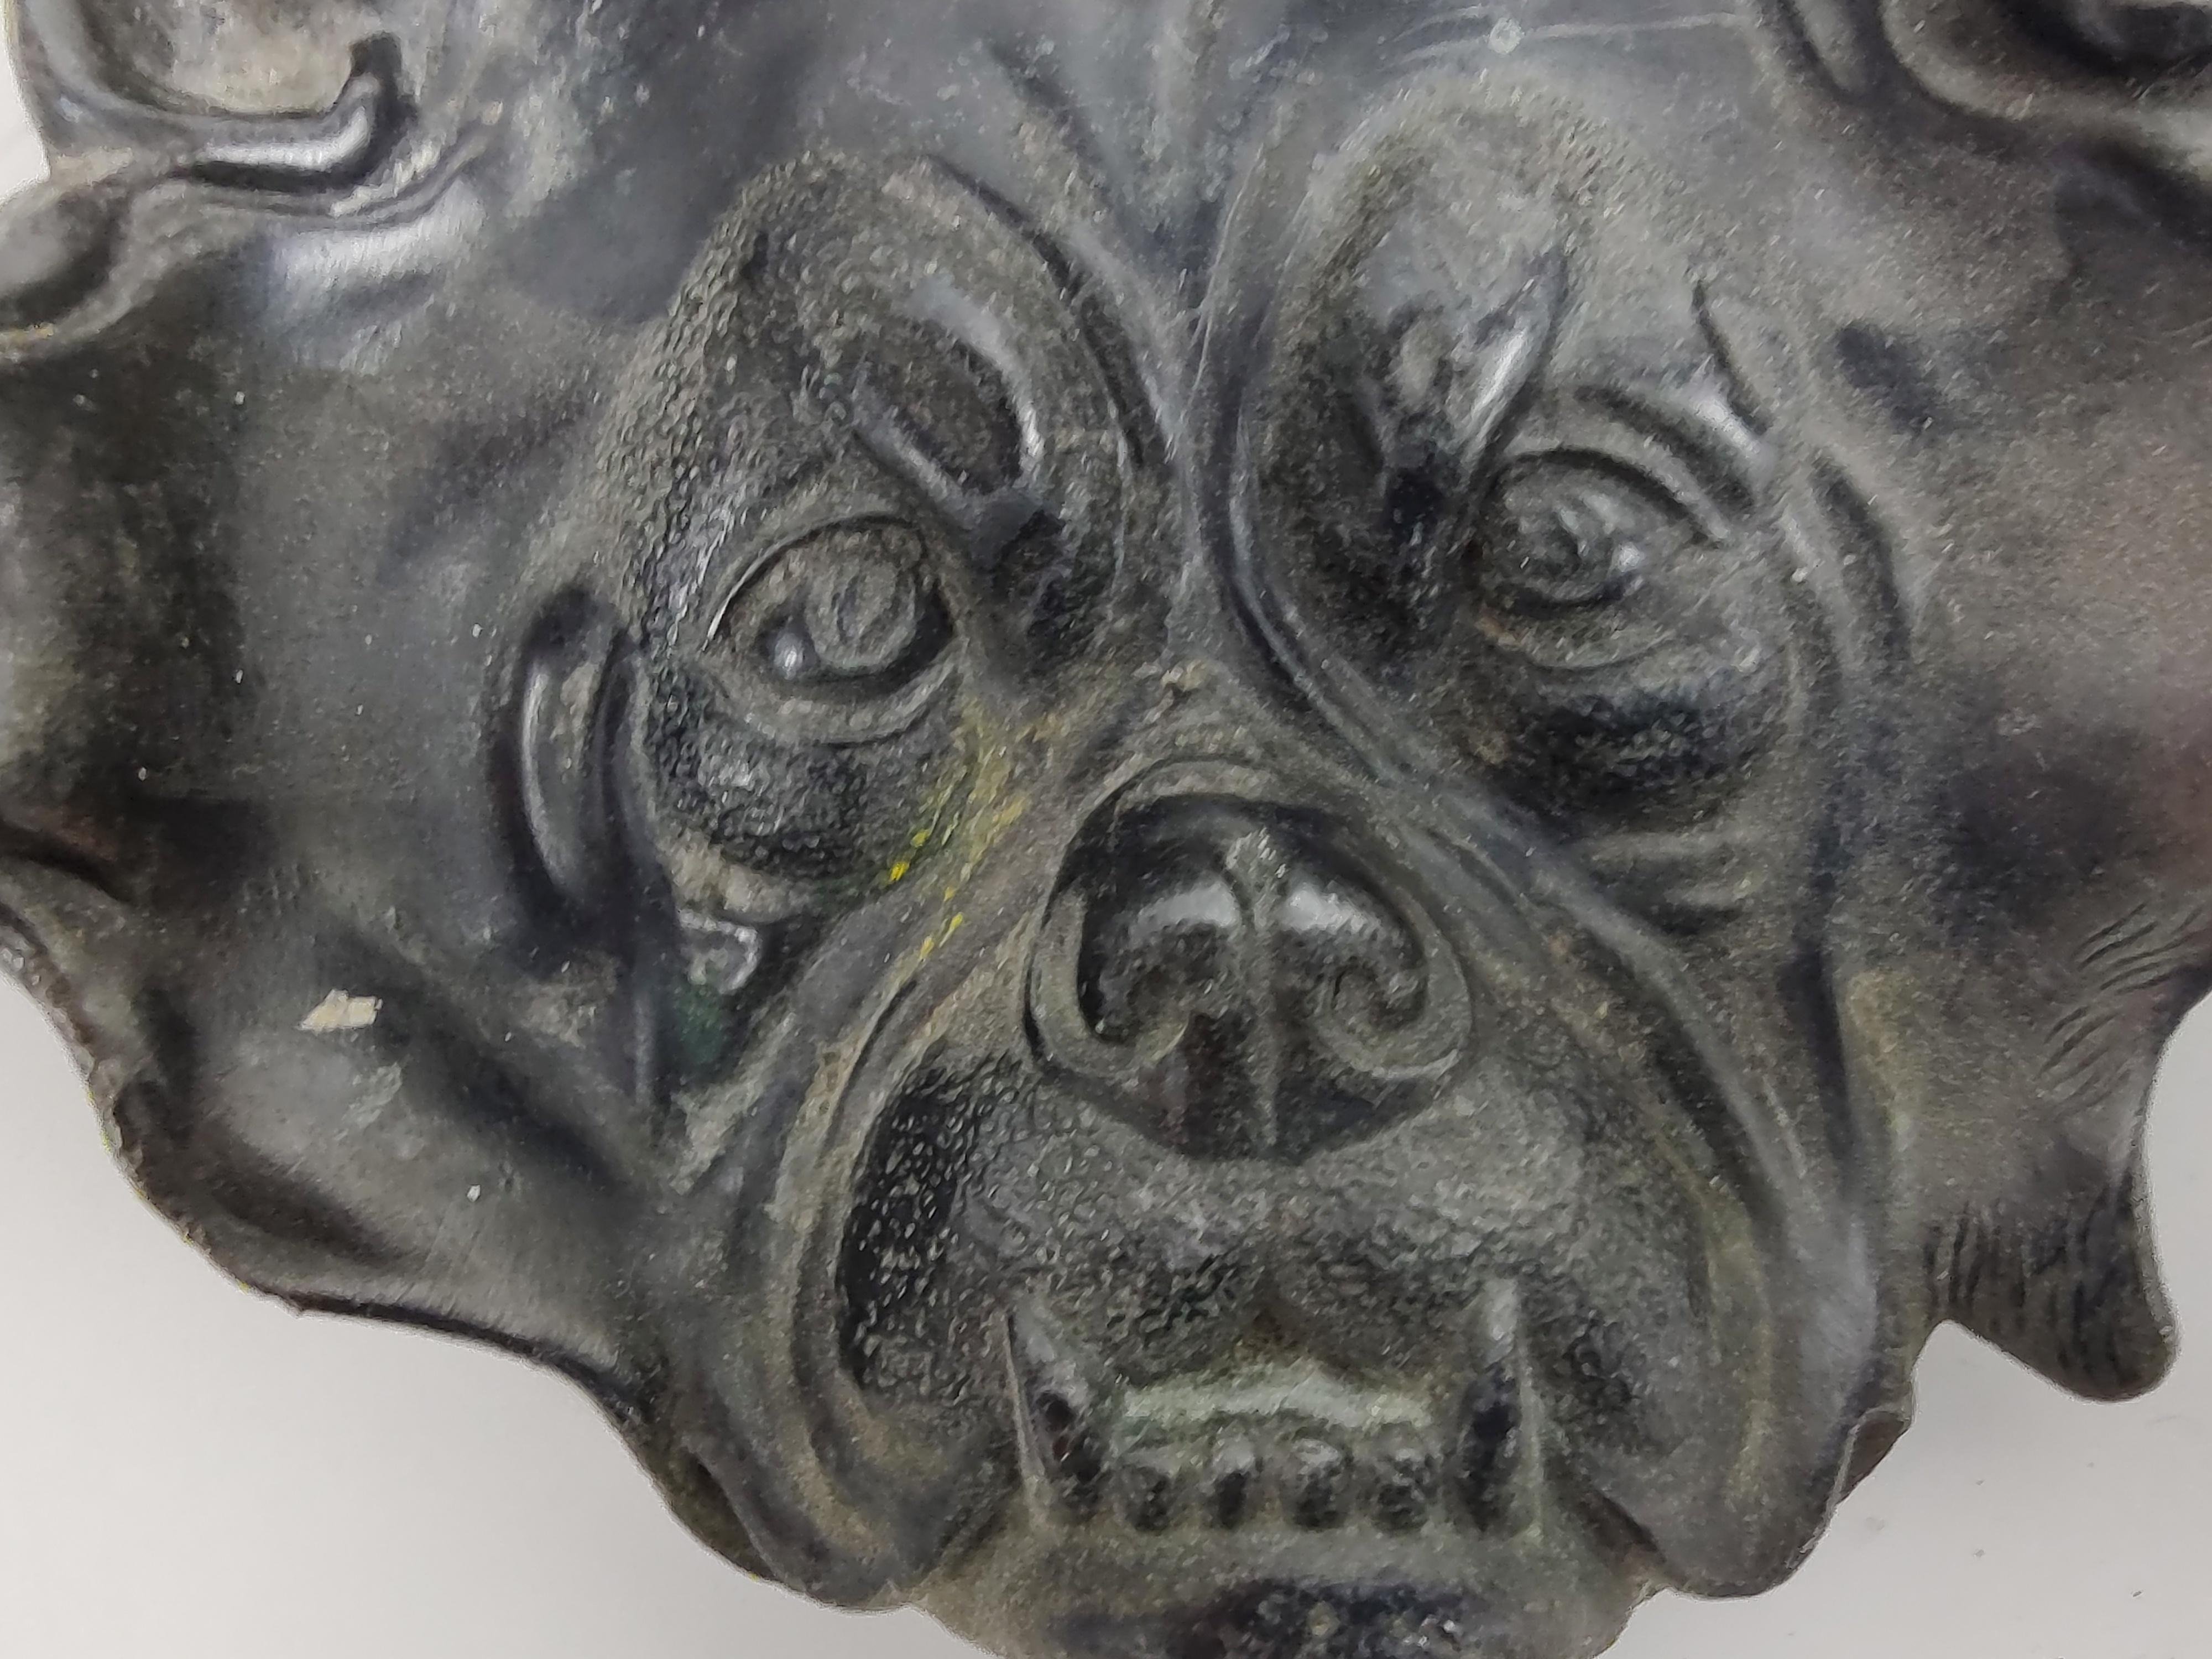 Fabulous and hard to find bulldog face ashtray built to accommodate a cigar. Original Black Paint present. In excellent vintage condition with minimal wear.